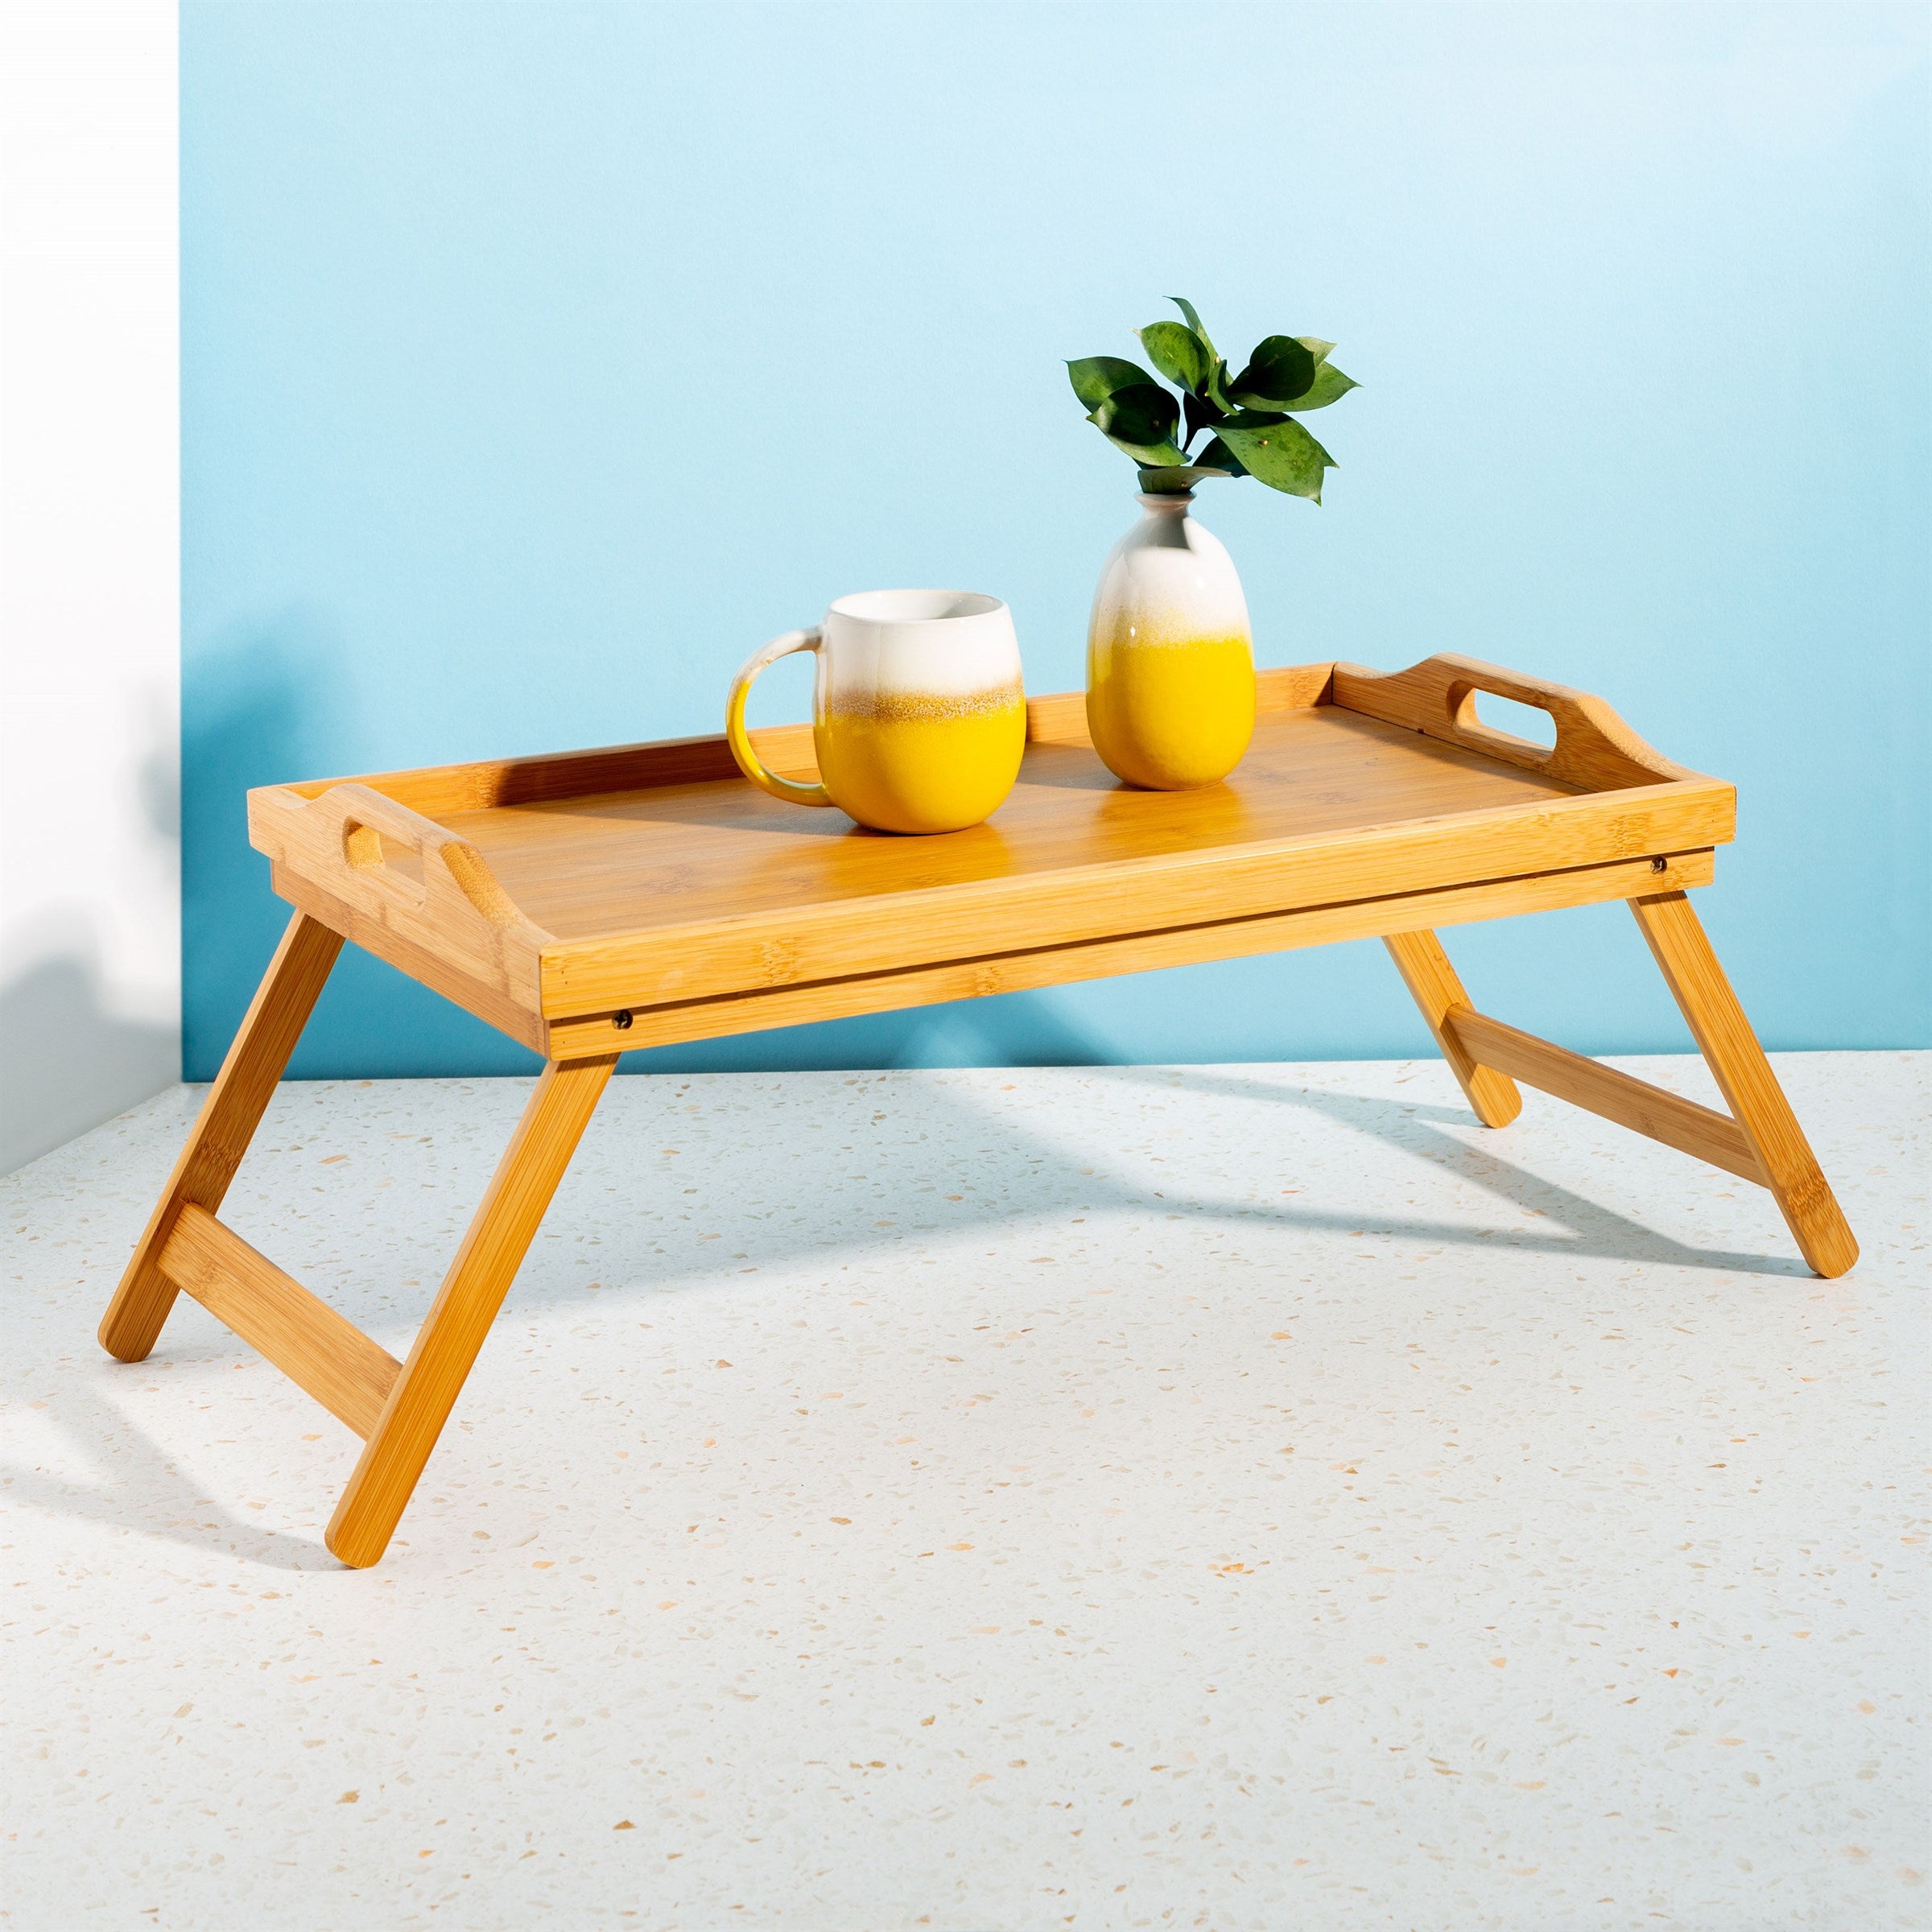 Sass & Belle Bamboo Breakfast Tray with Folding Legs